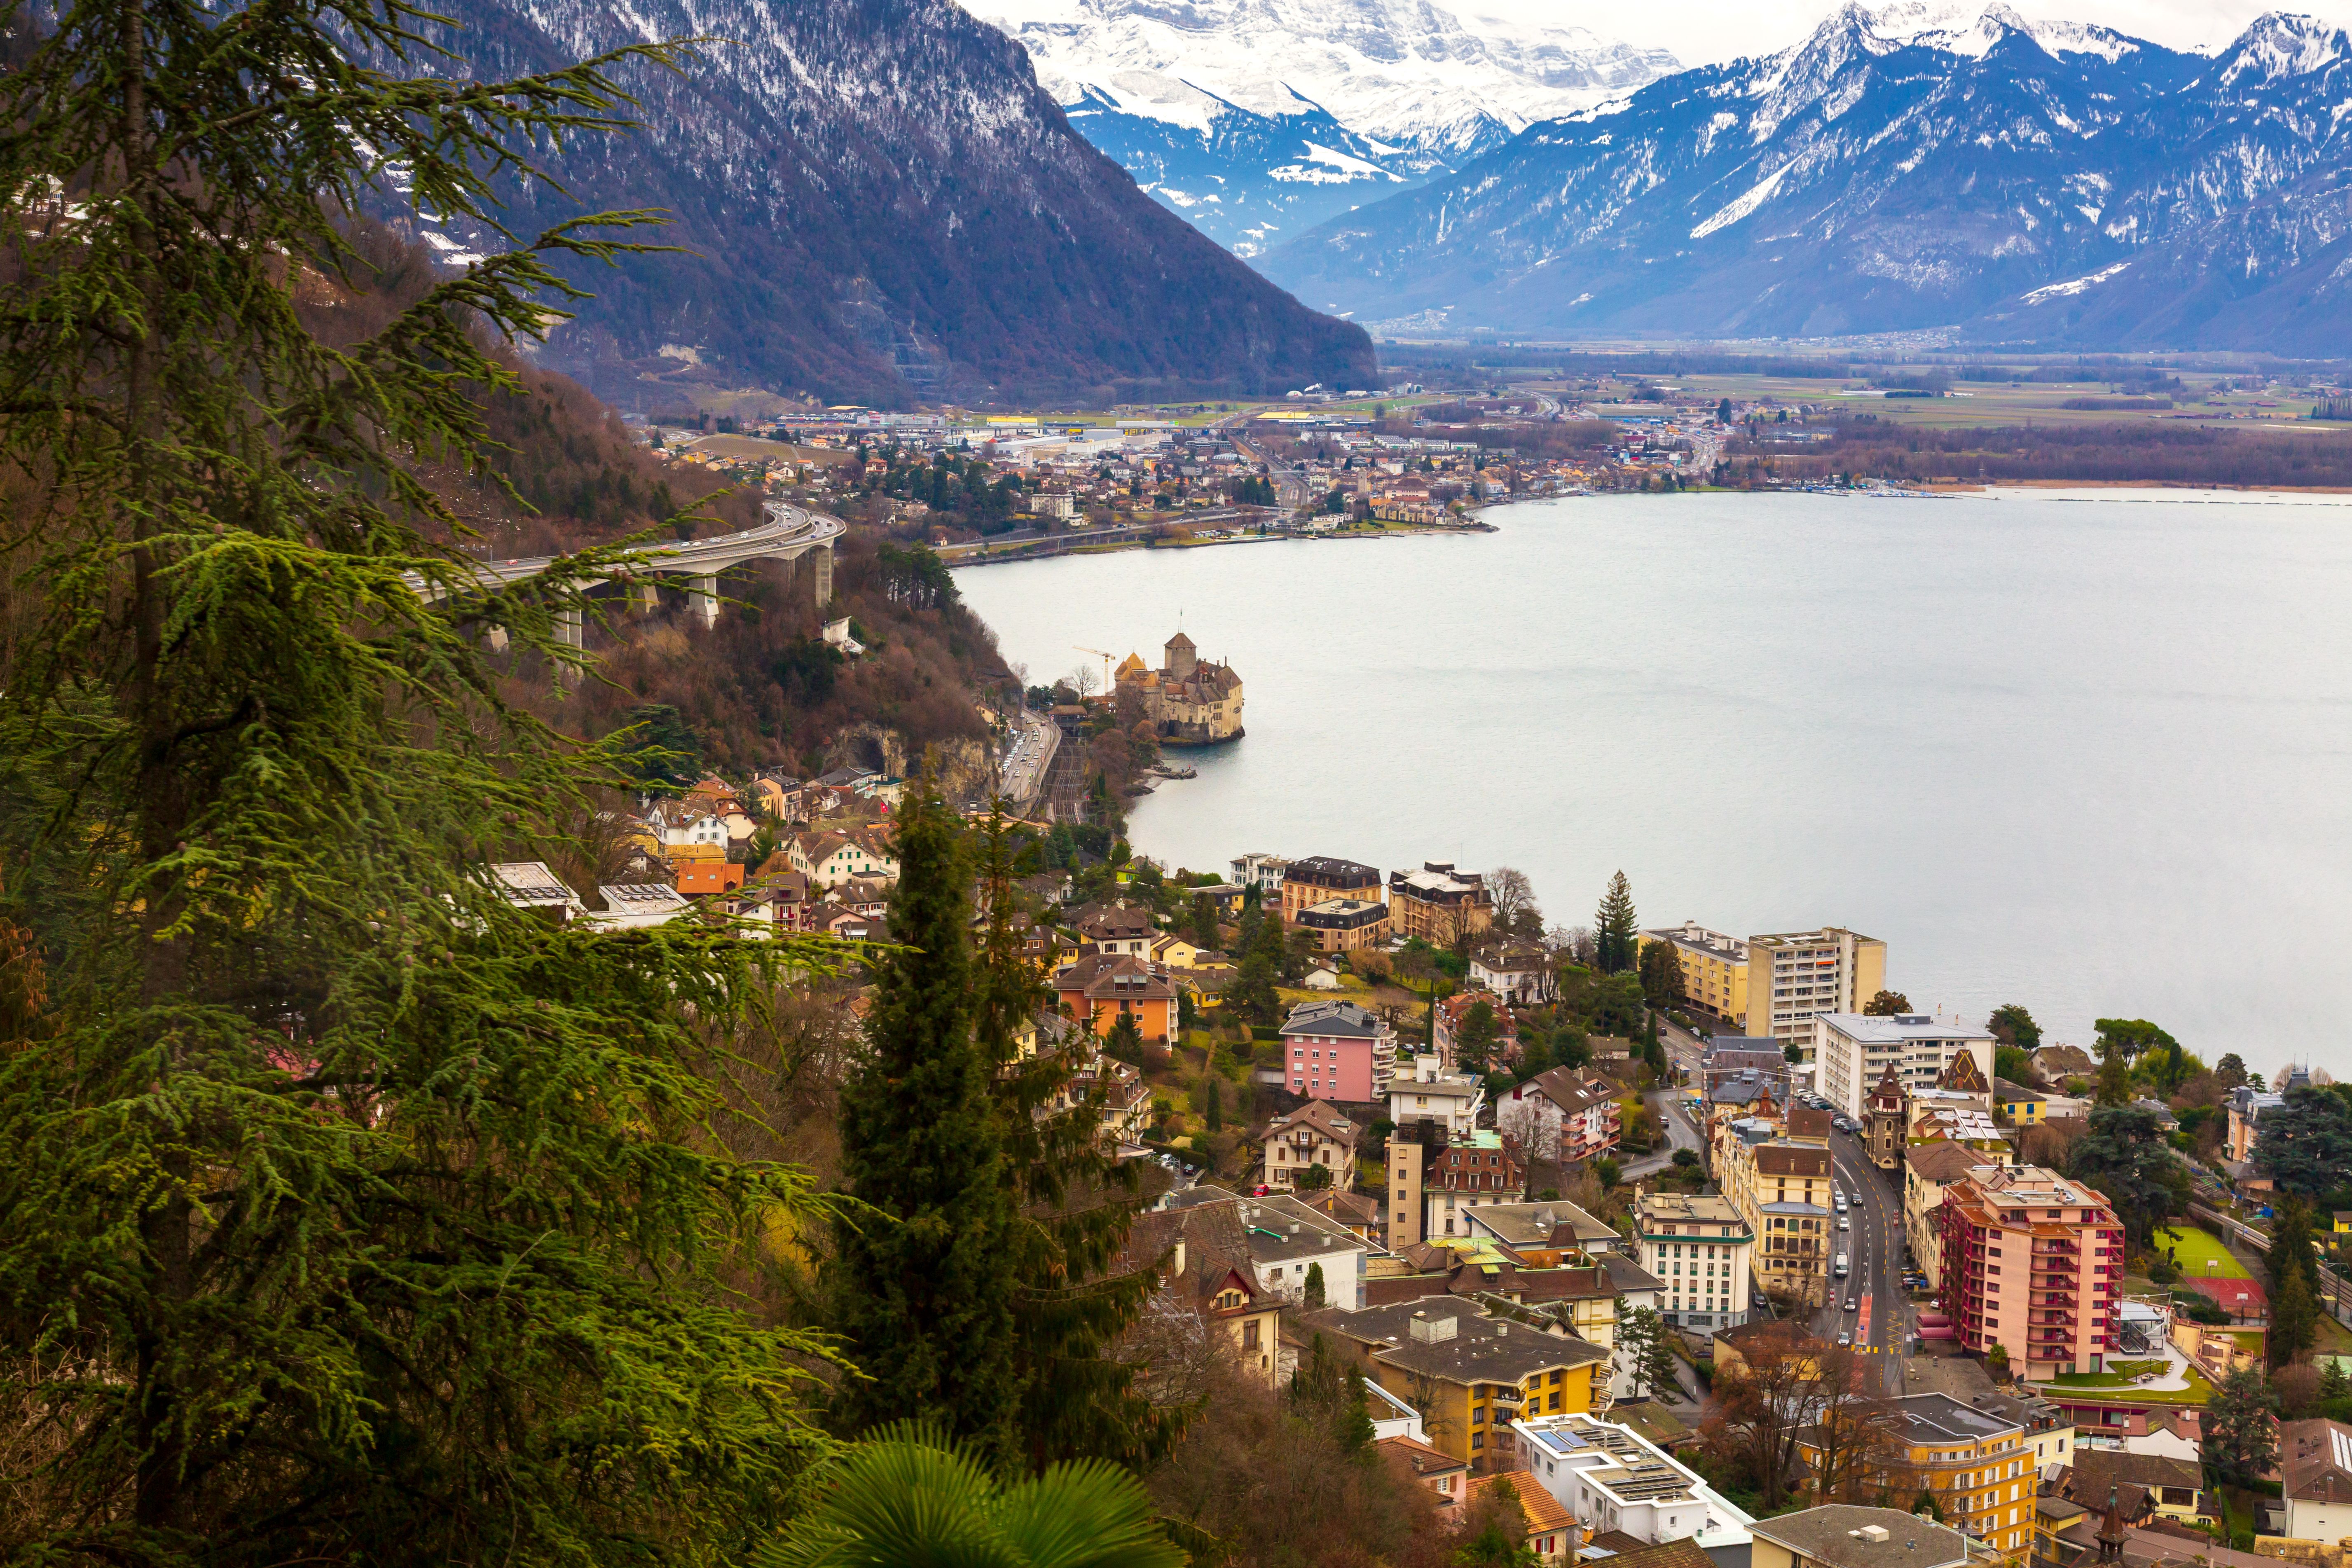 Montreux in winter